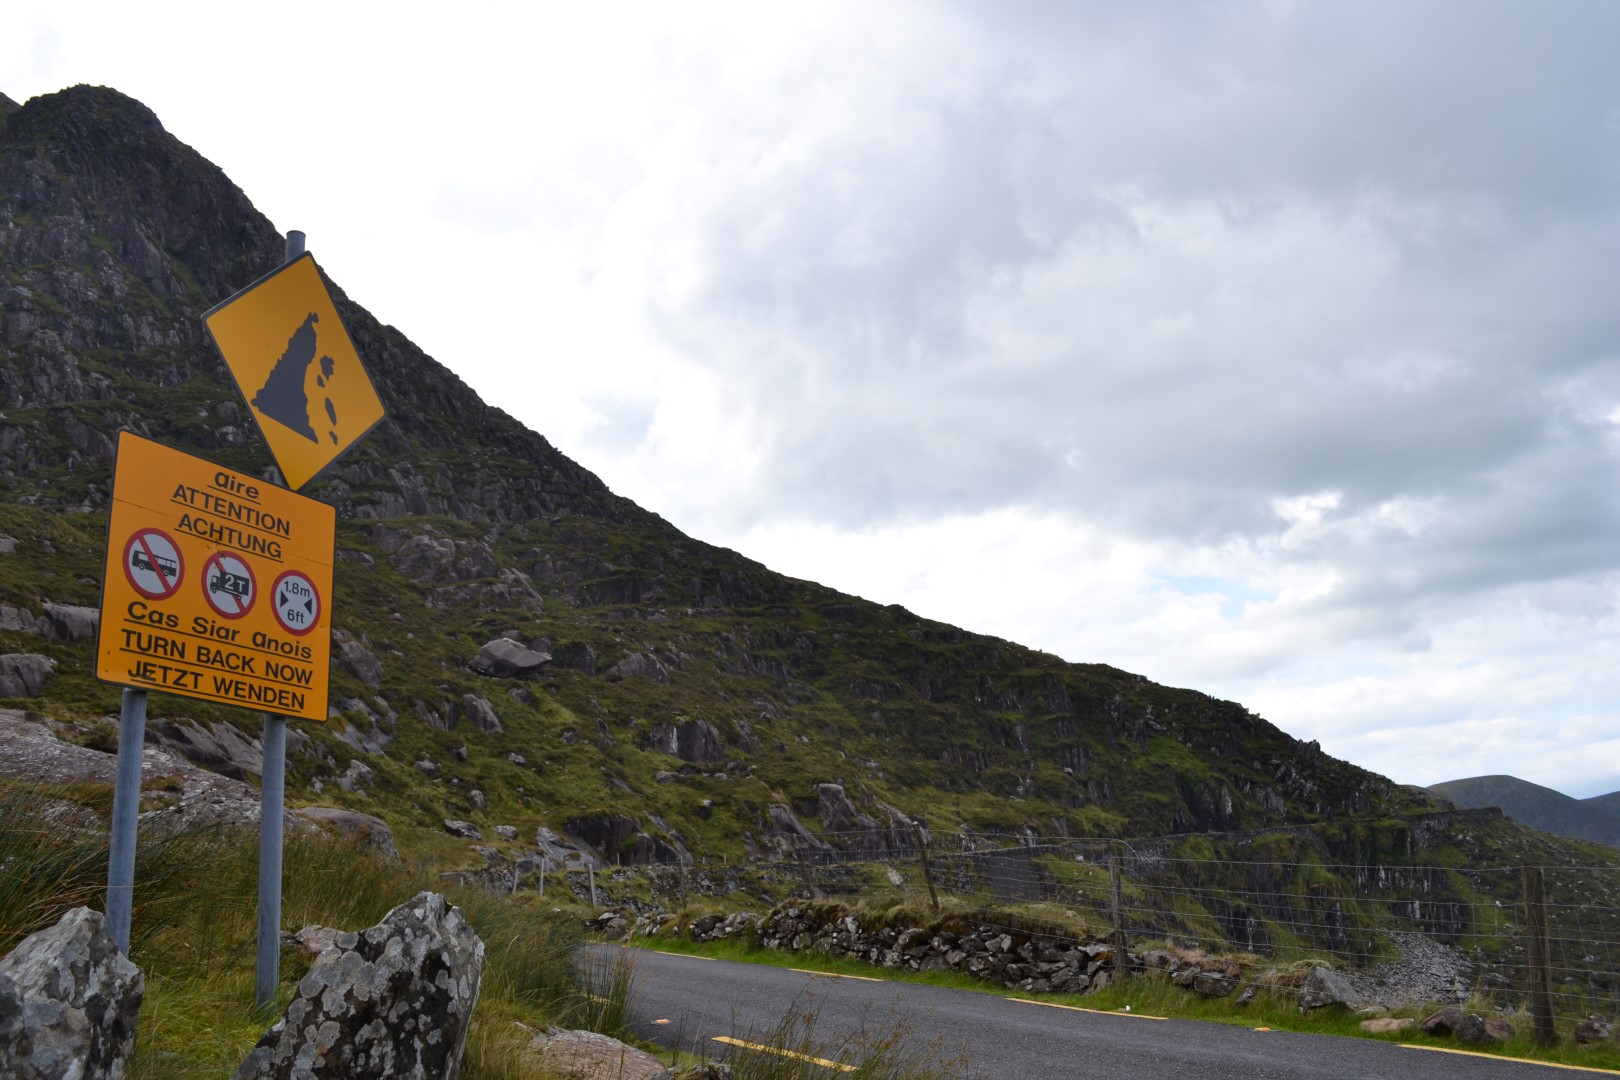 You know it's not good when the sign says to turn around! -Connor's Pass, Ireland